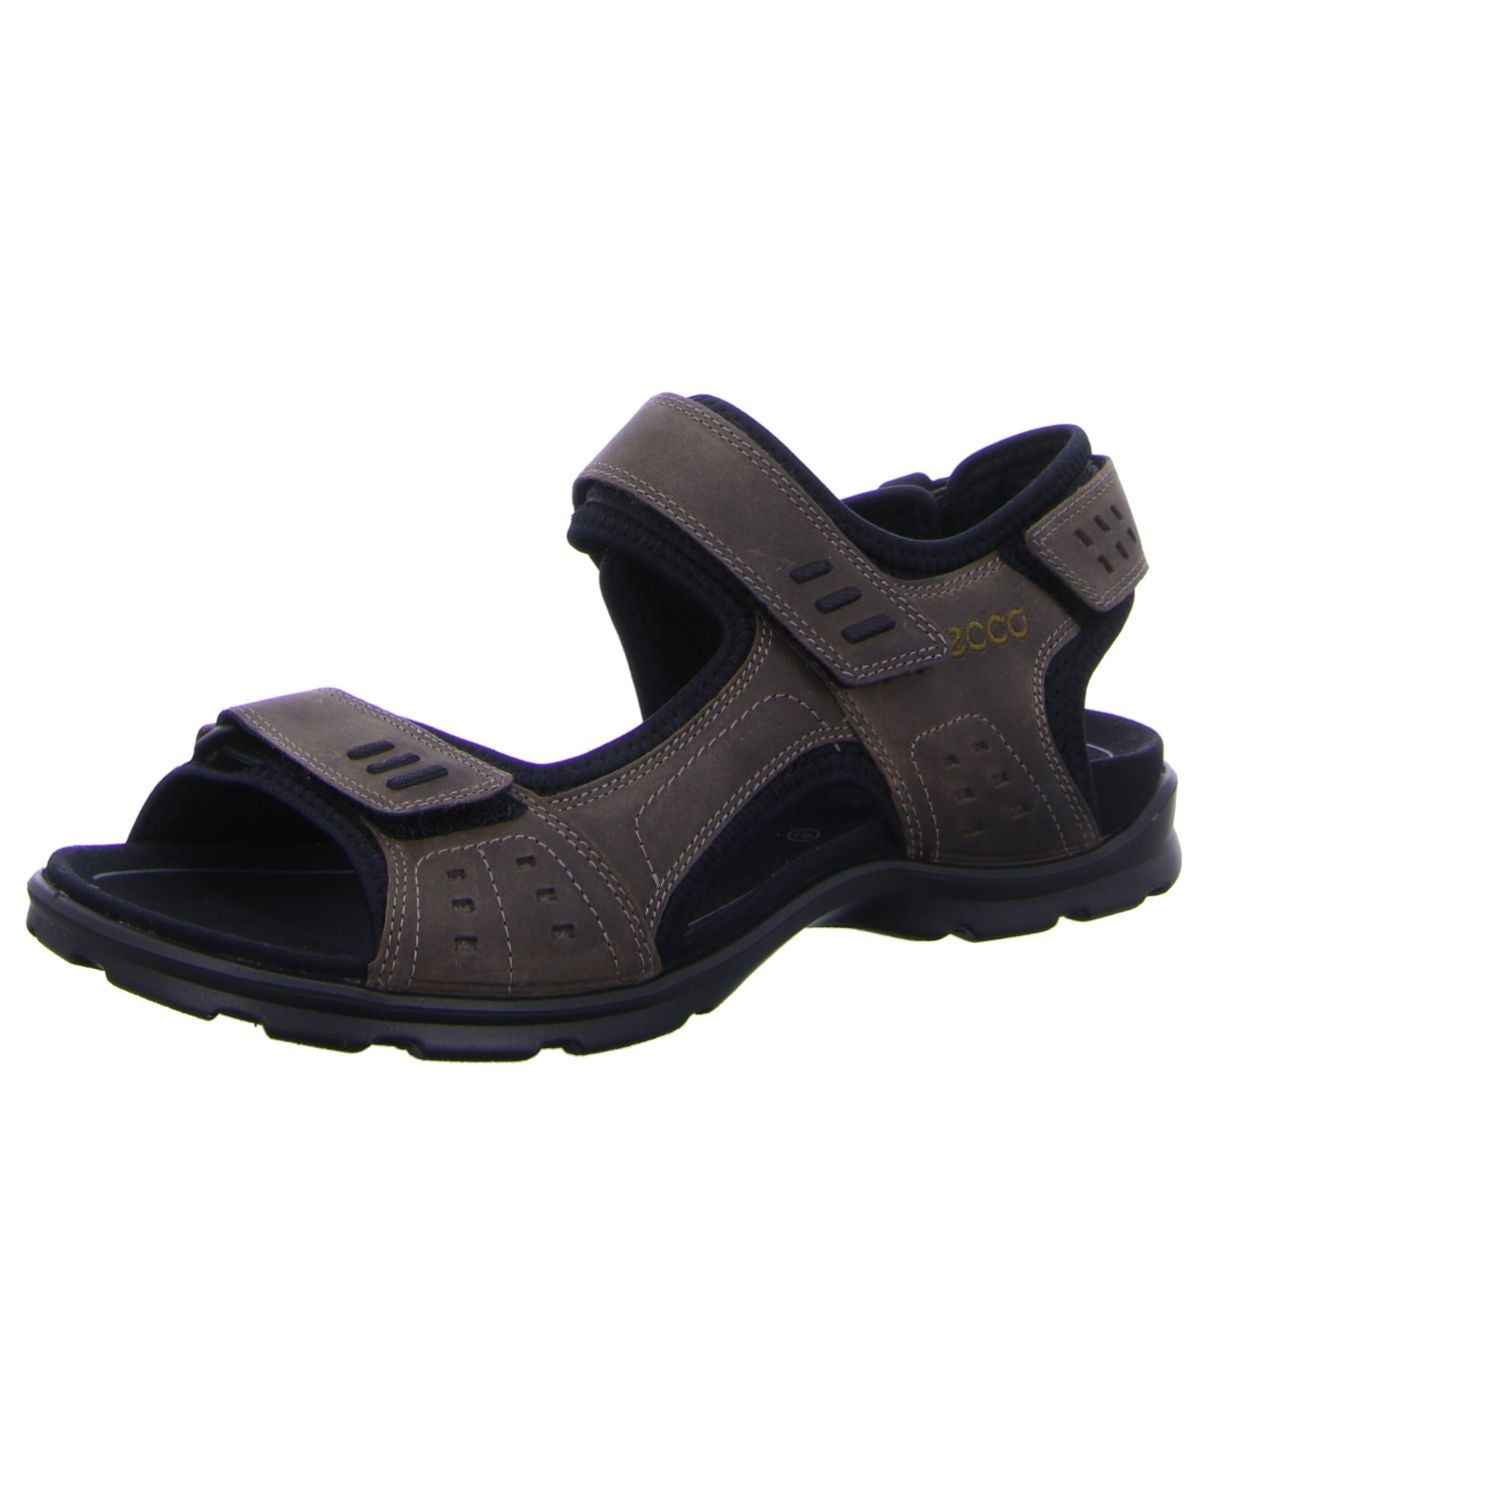 Ecco Sporty Sandals brown